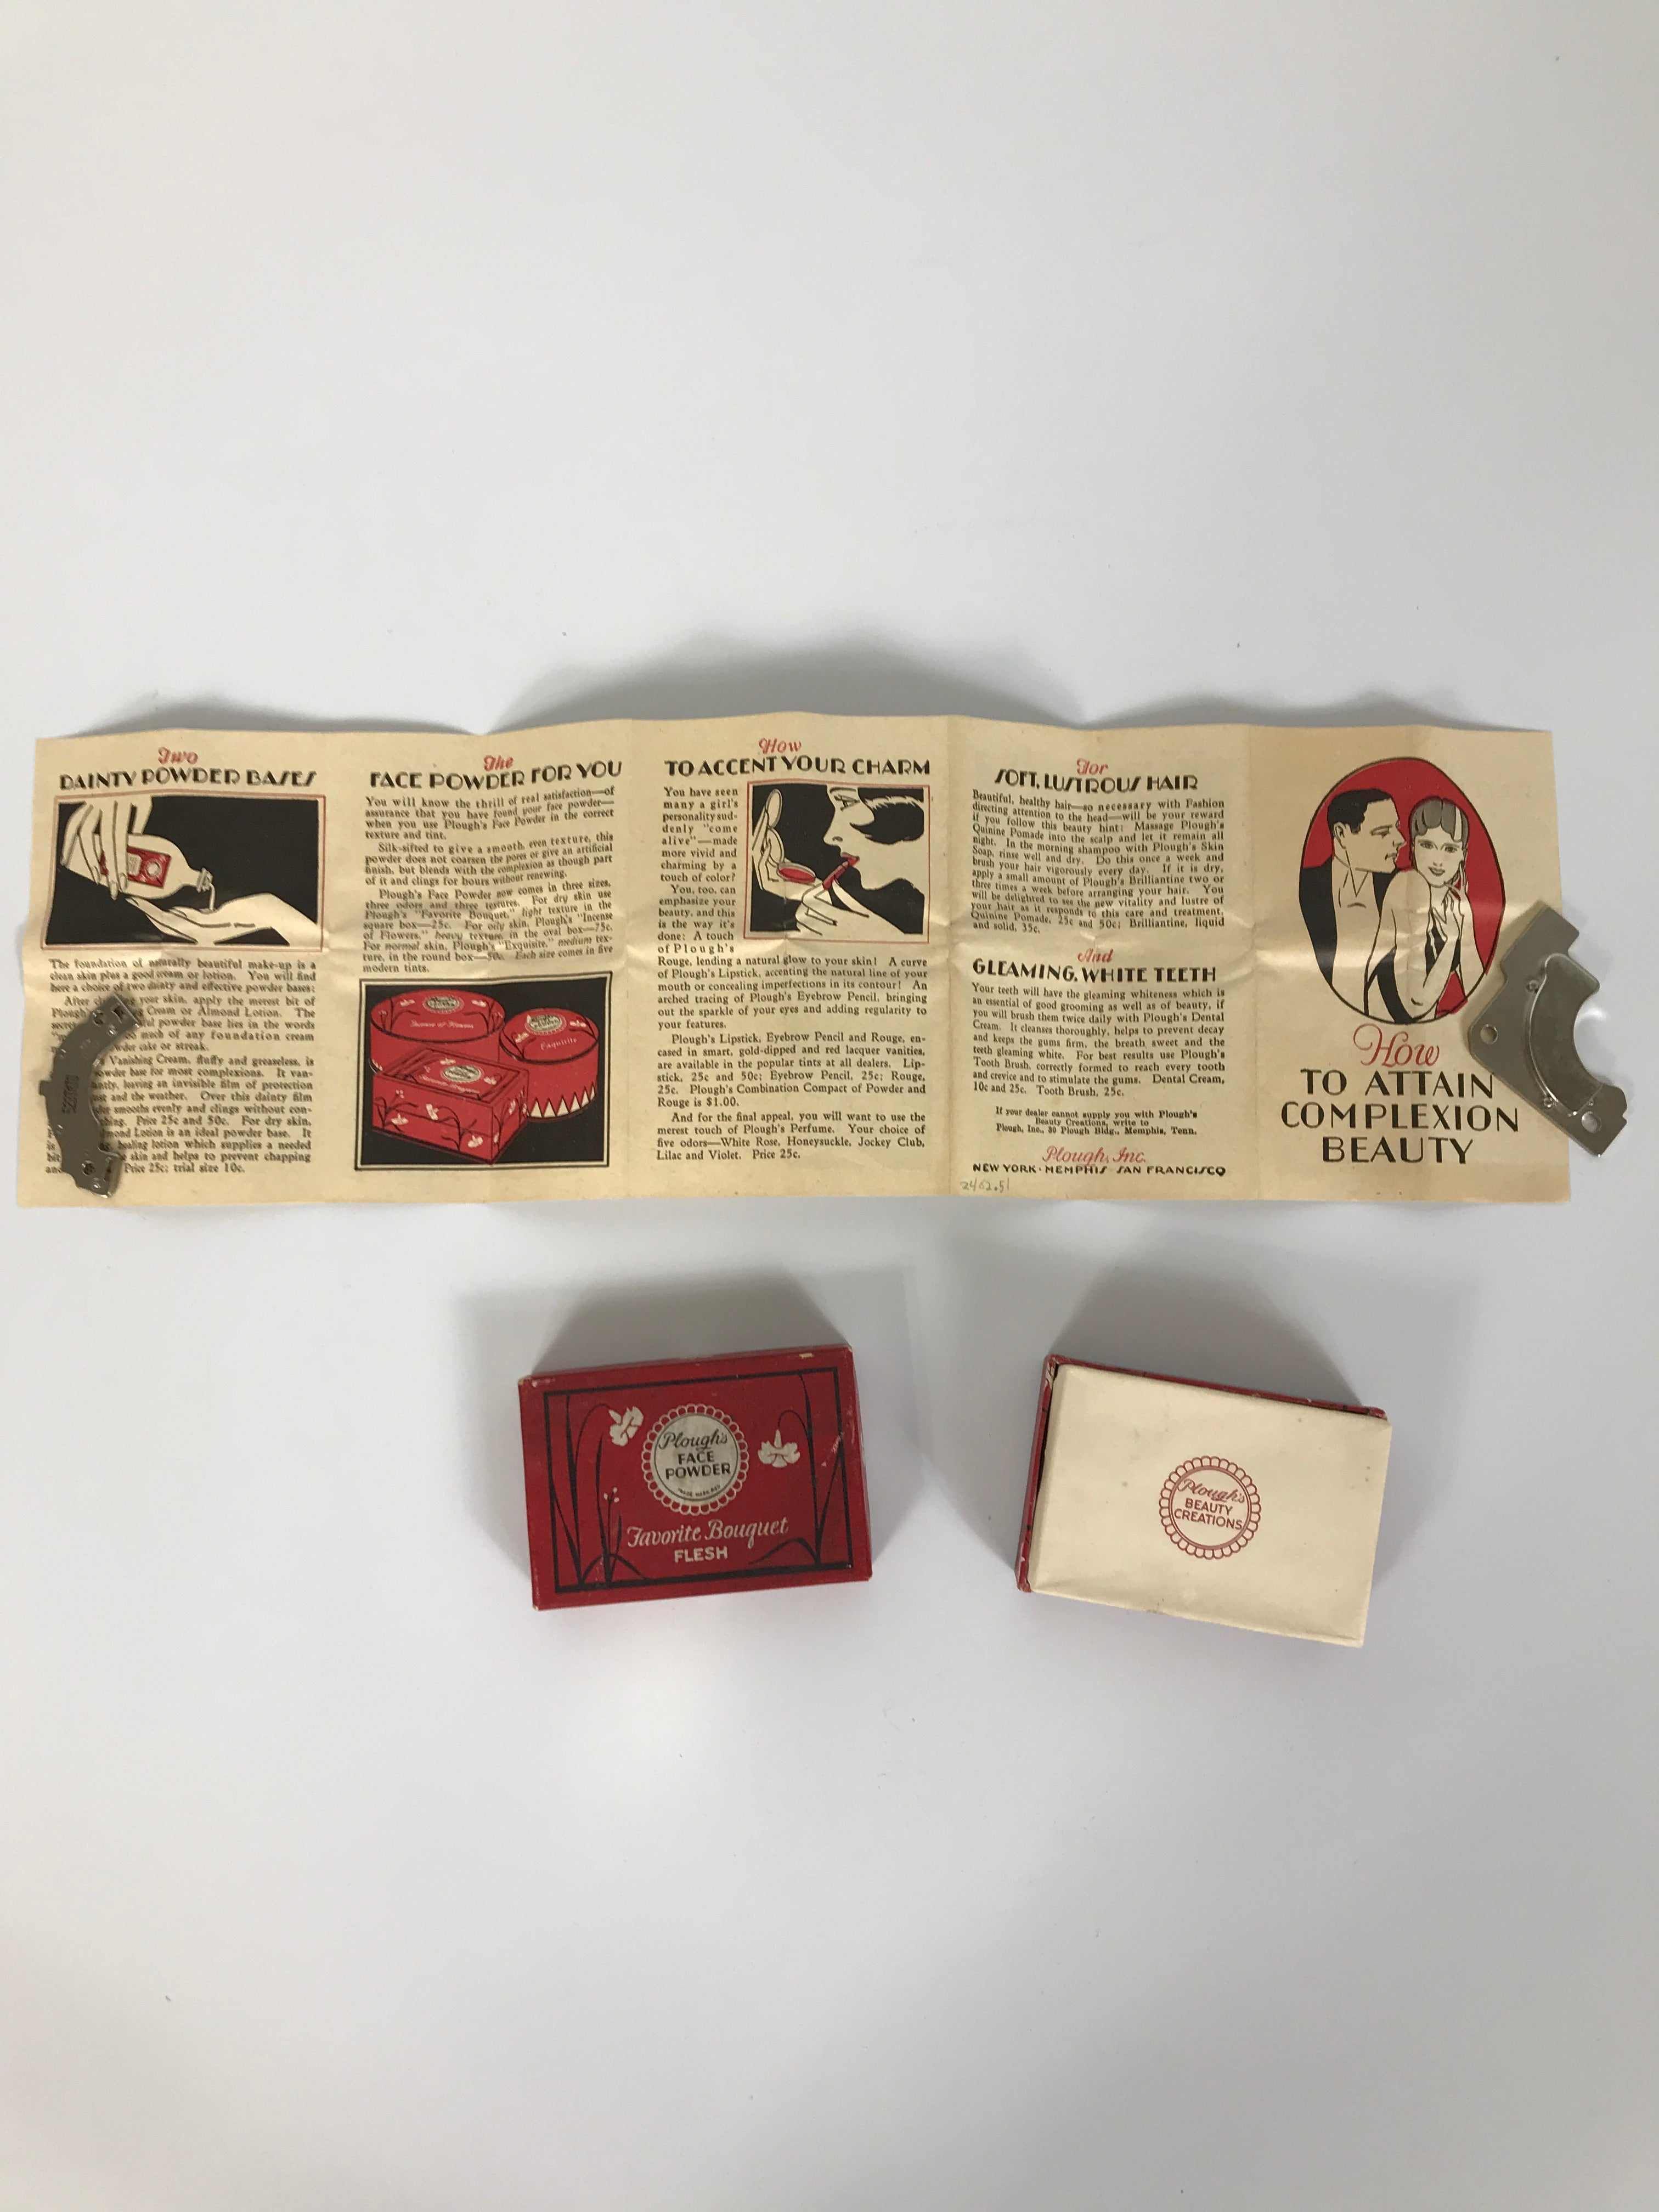 Antique Plough's Face Powder Unused in Box with Instructions